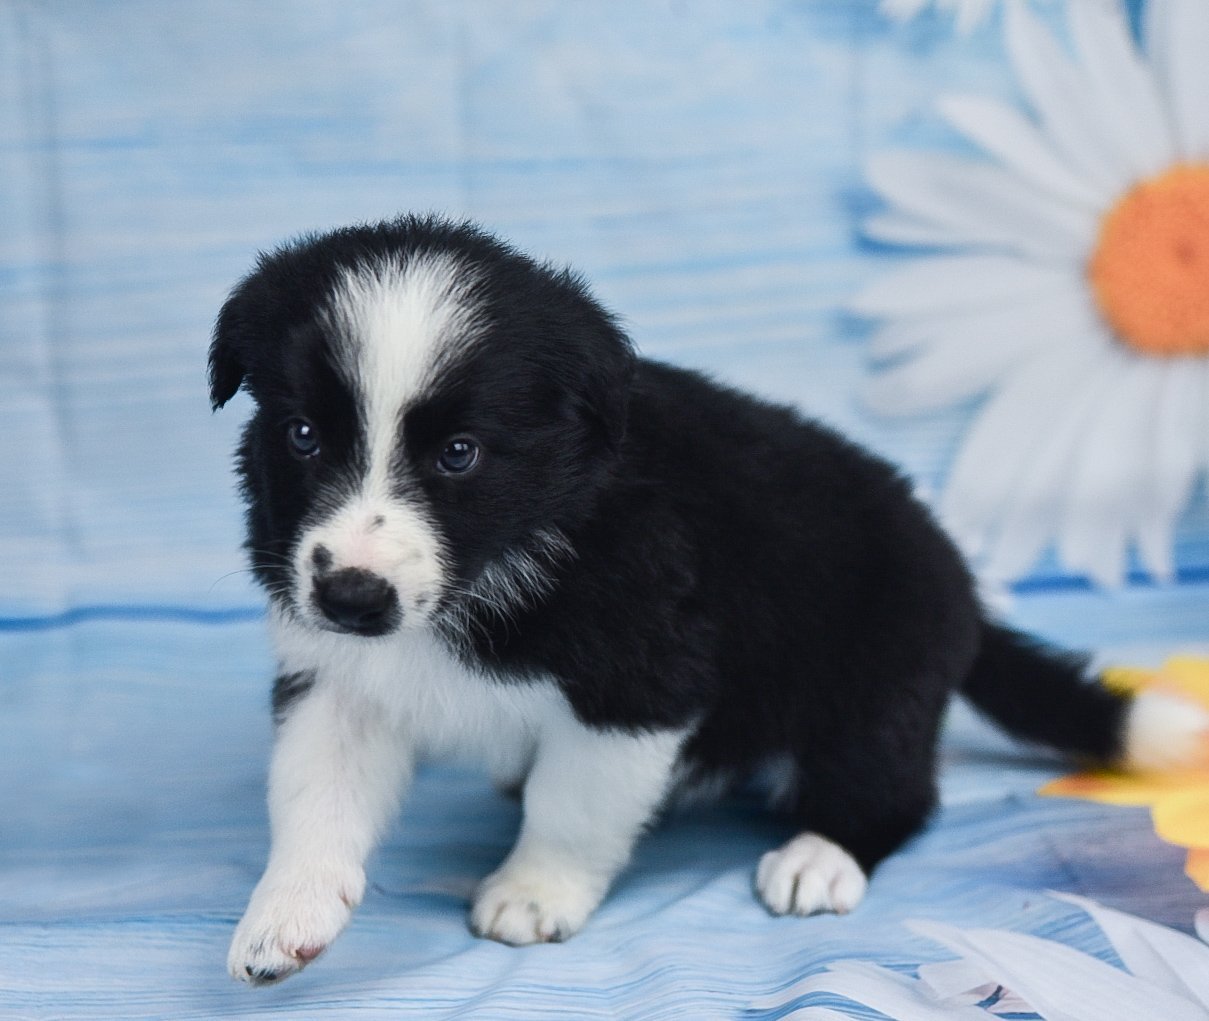 This cute little black and white border collie puppy